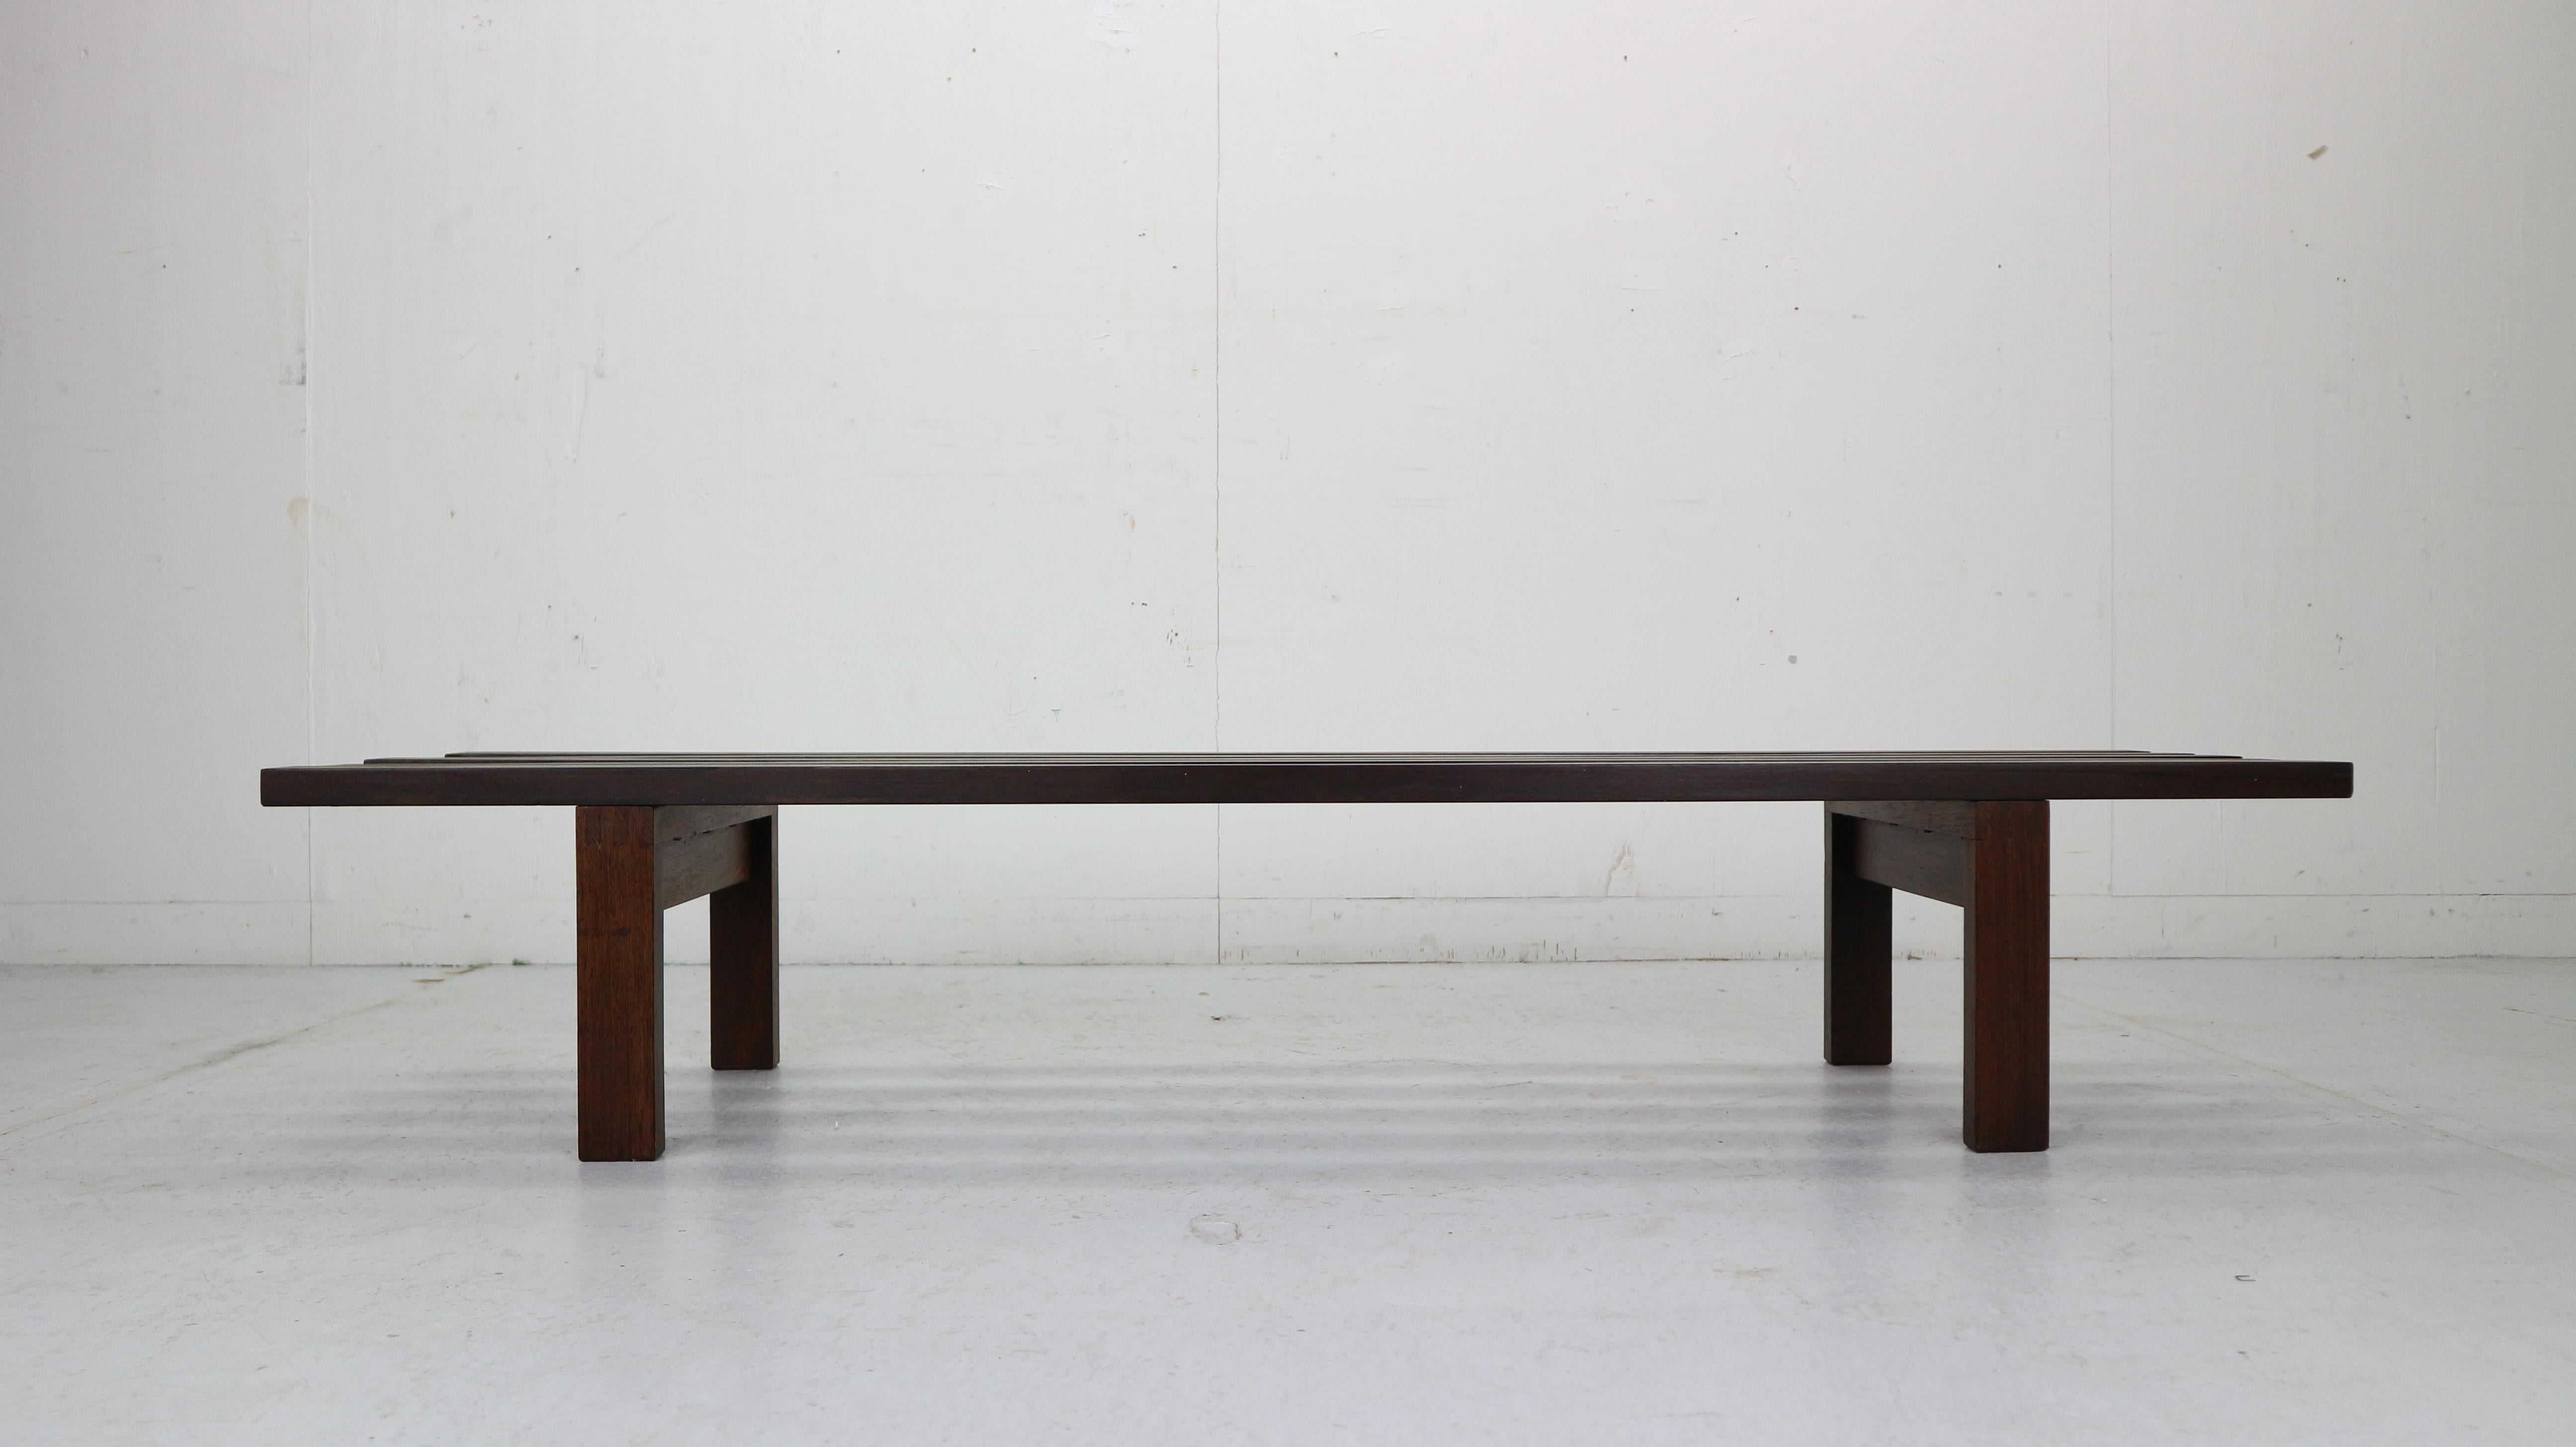 Minimalistic Dutch design wenge slat bench designed by Martin Visser for ‘t Spectrum in 1961's. This is an original version (model: BZ -81, marked) designed in 1960/1961 for het Stedelijk Museum Amsterdam.
This vintage slatted bench can be used as